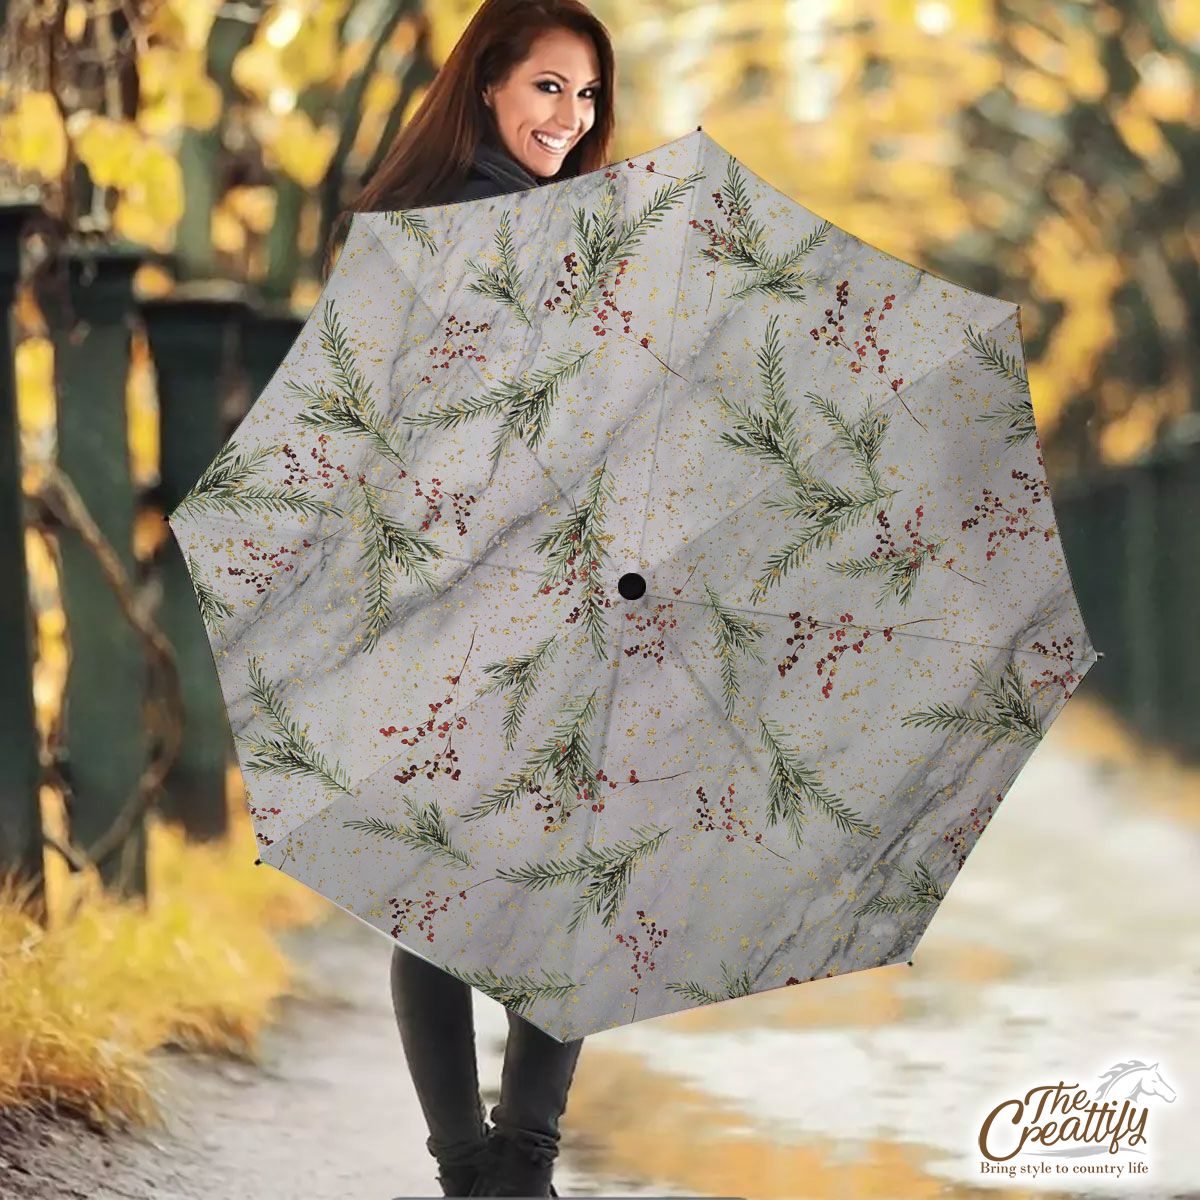 Red Berries With Pine Twig Pattern Umbrella